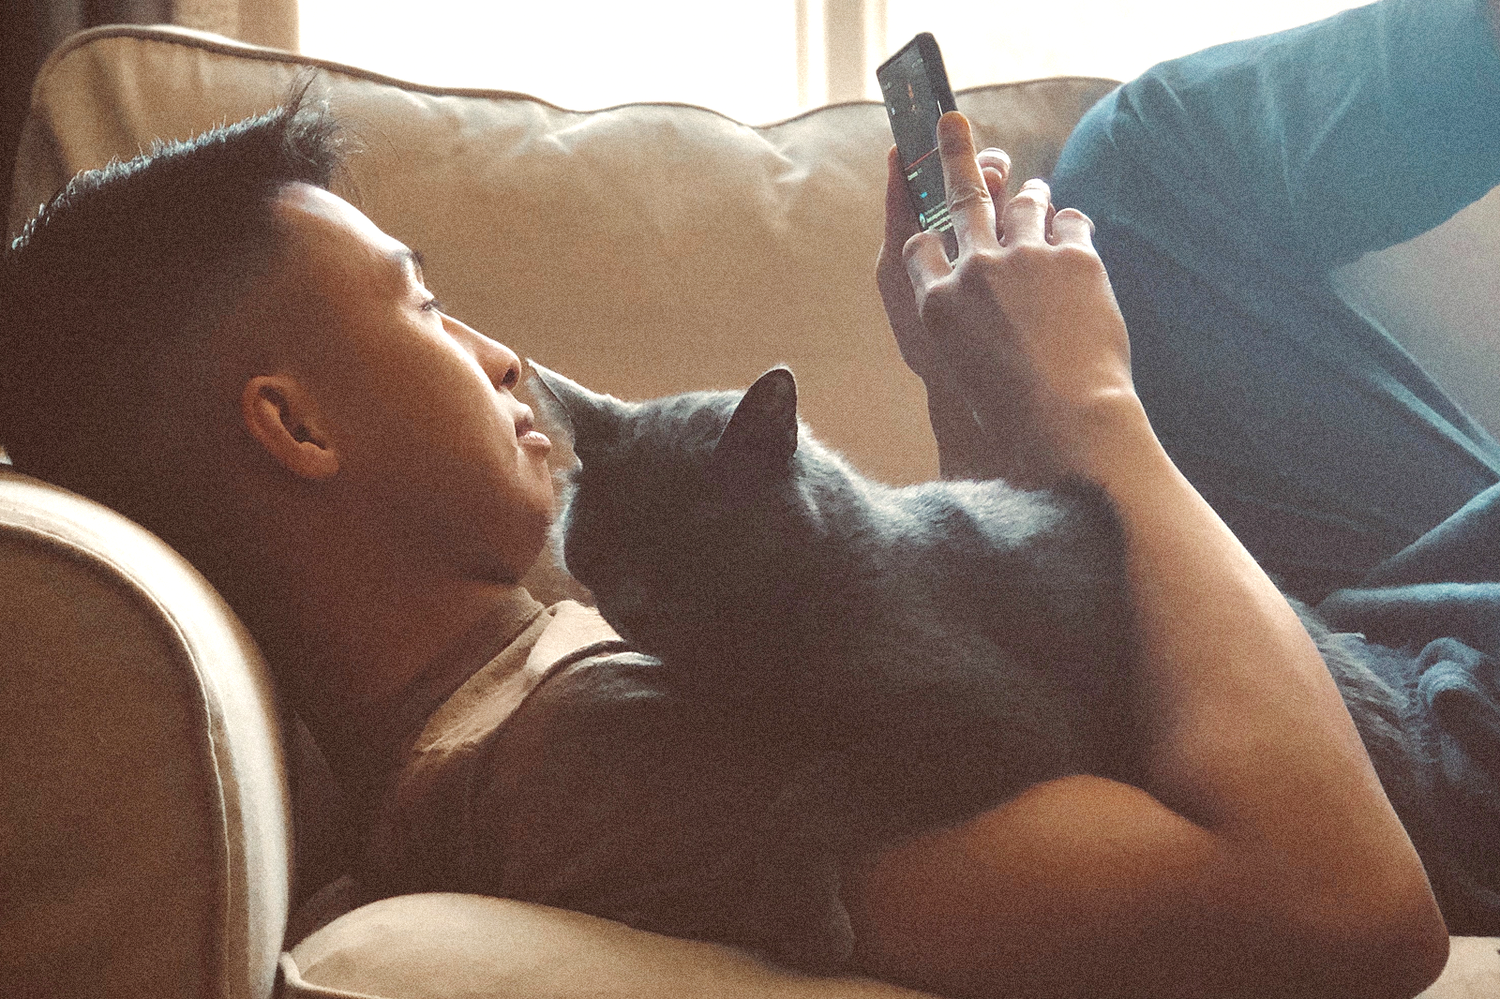 Man laying on a couch using his phone with a black cat sleeping on his chest.